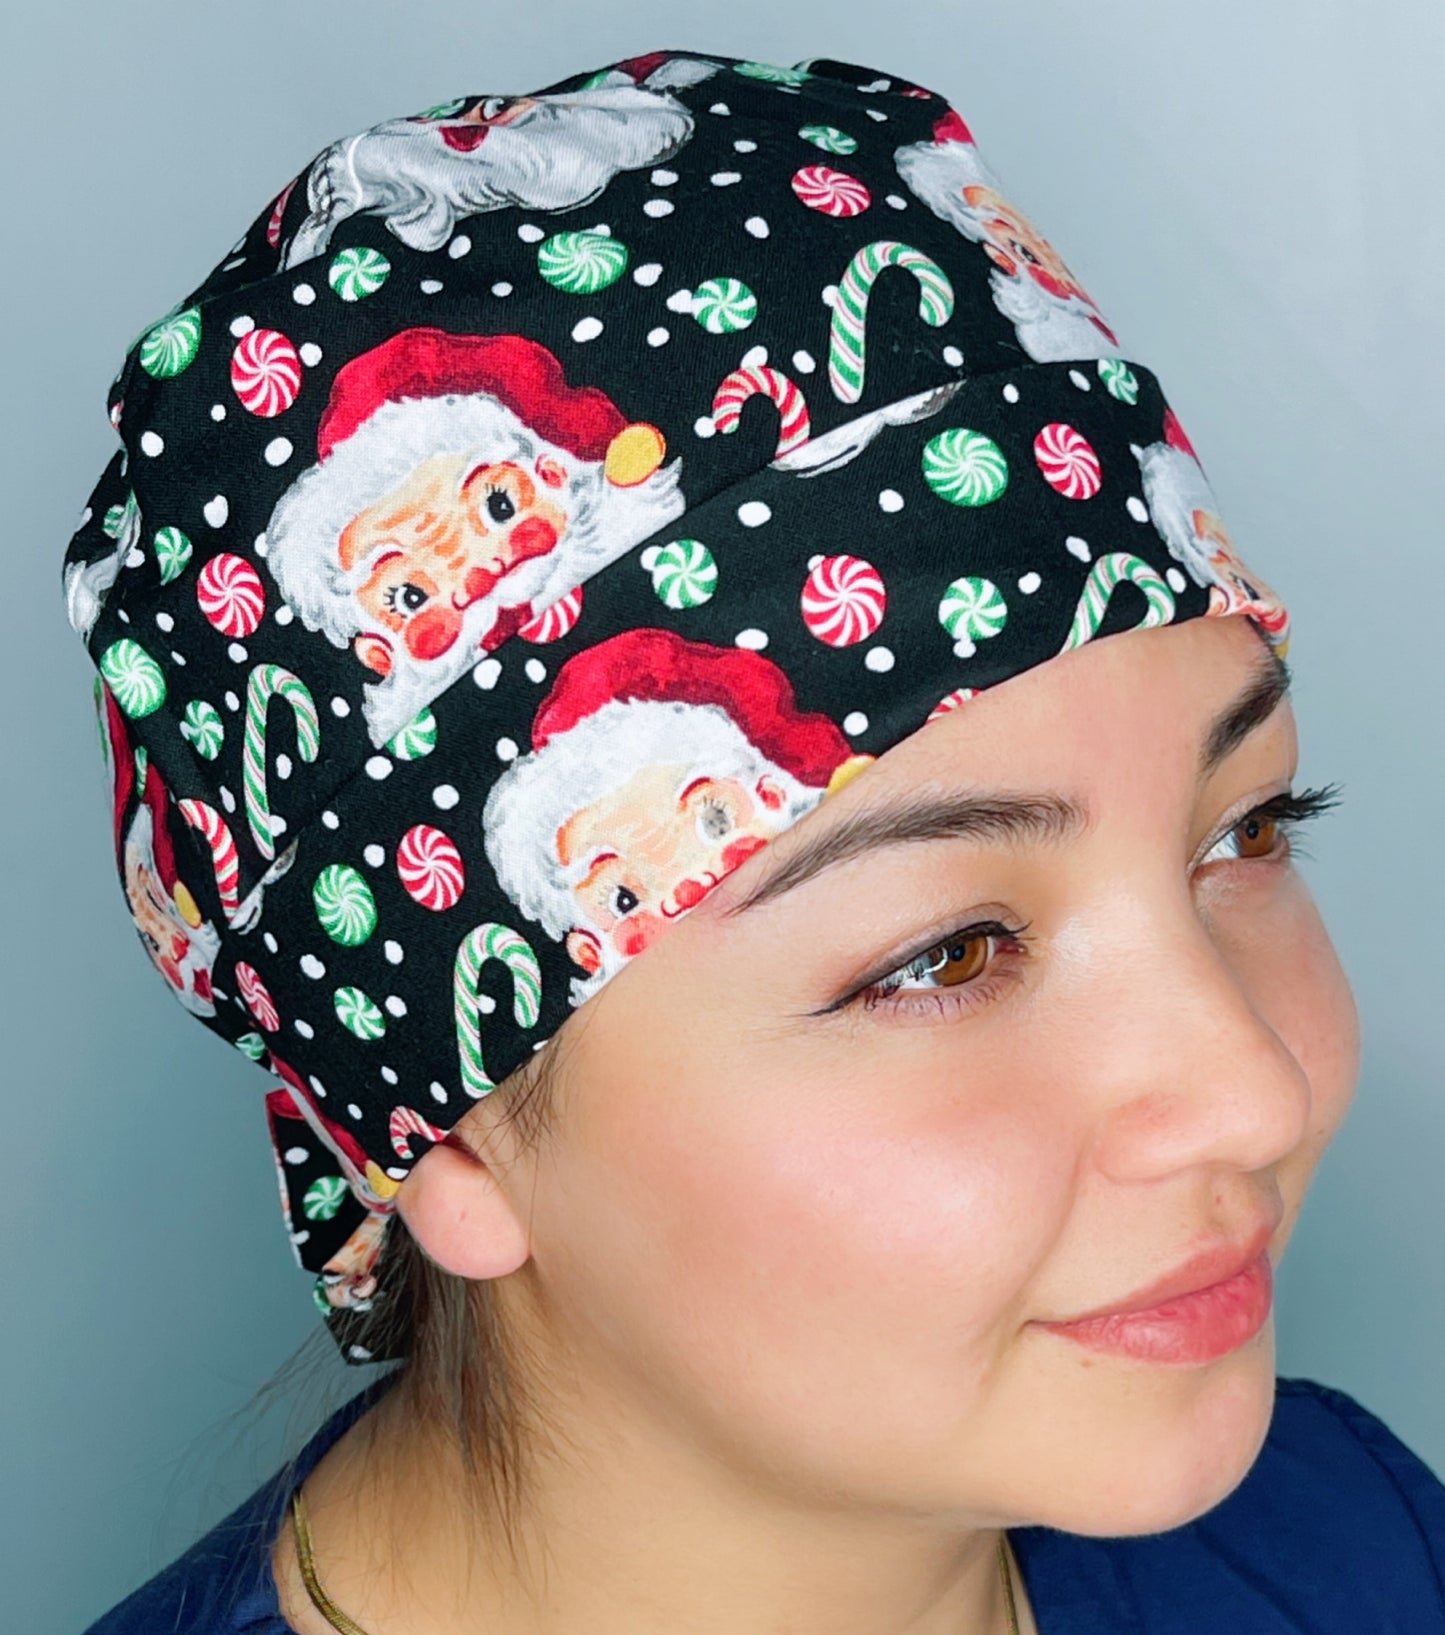 Santa & Candy Canes Winter/Christmas Holiday Themed Pixie